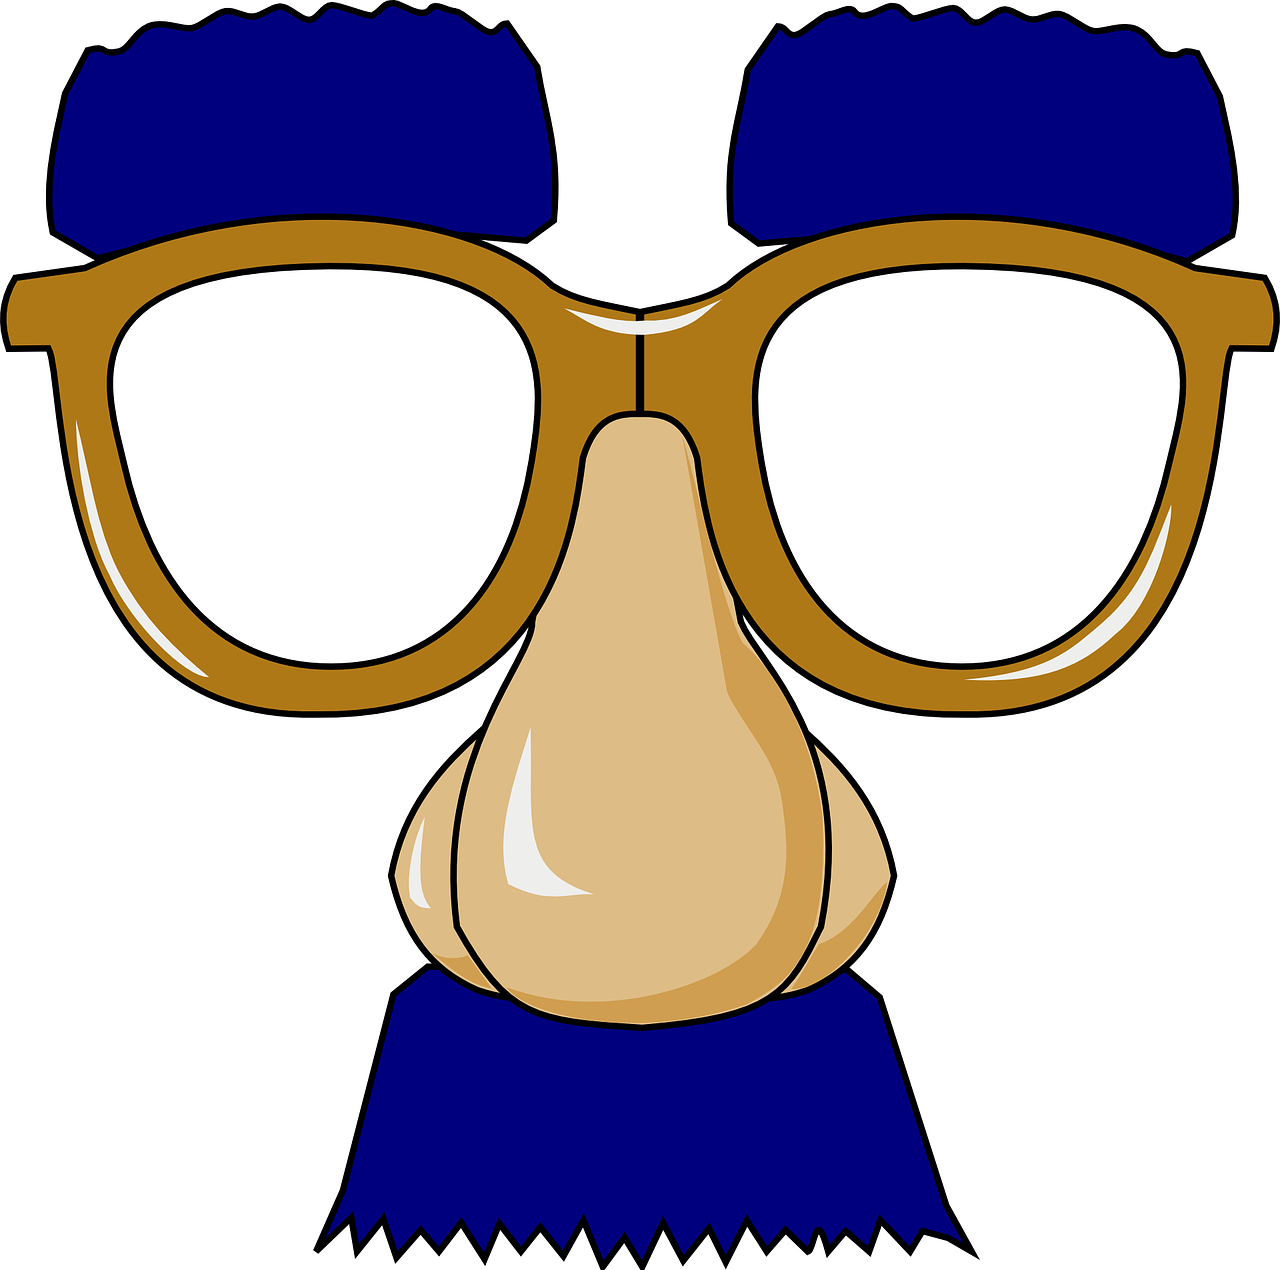 a cartoon character wearing glasses and a hat, inspired by Leo Leuppi, figuration libre, face photo, subgenius, blues, full color illustration